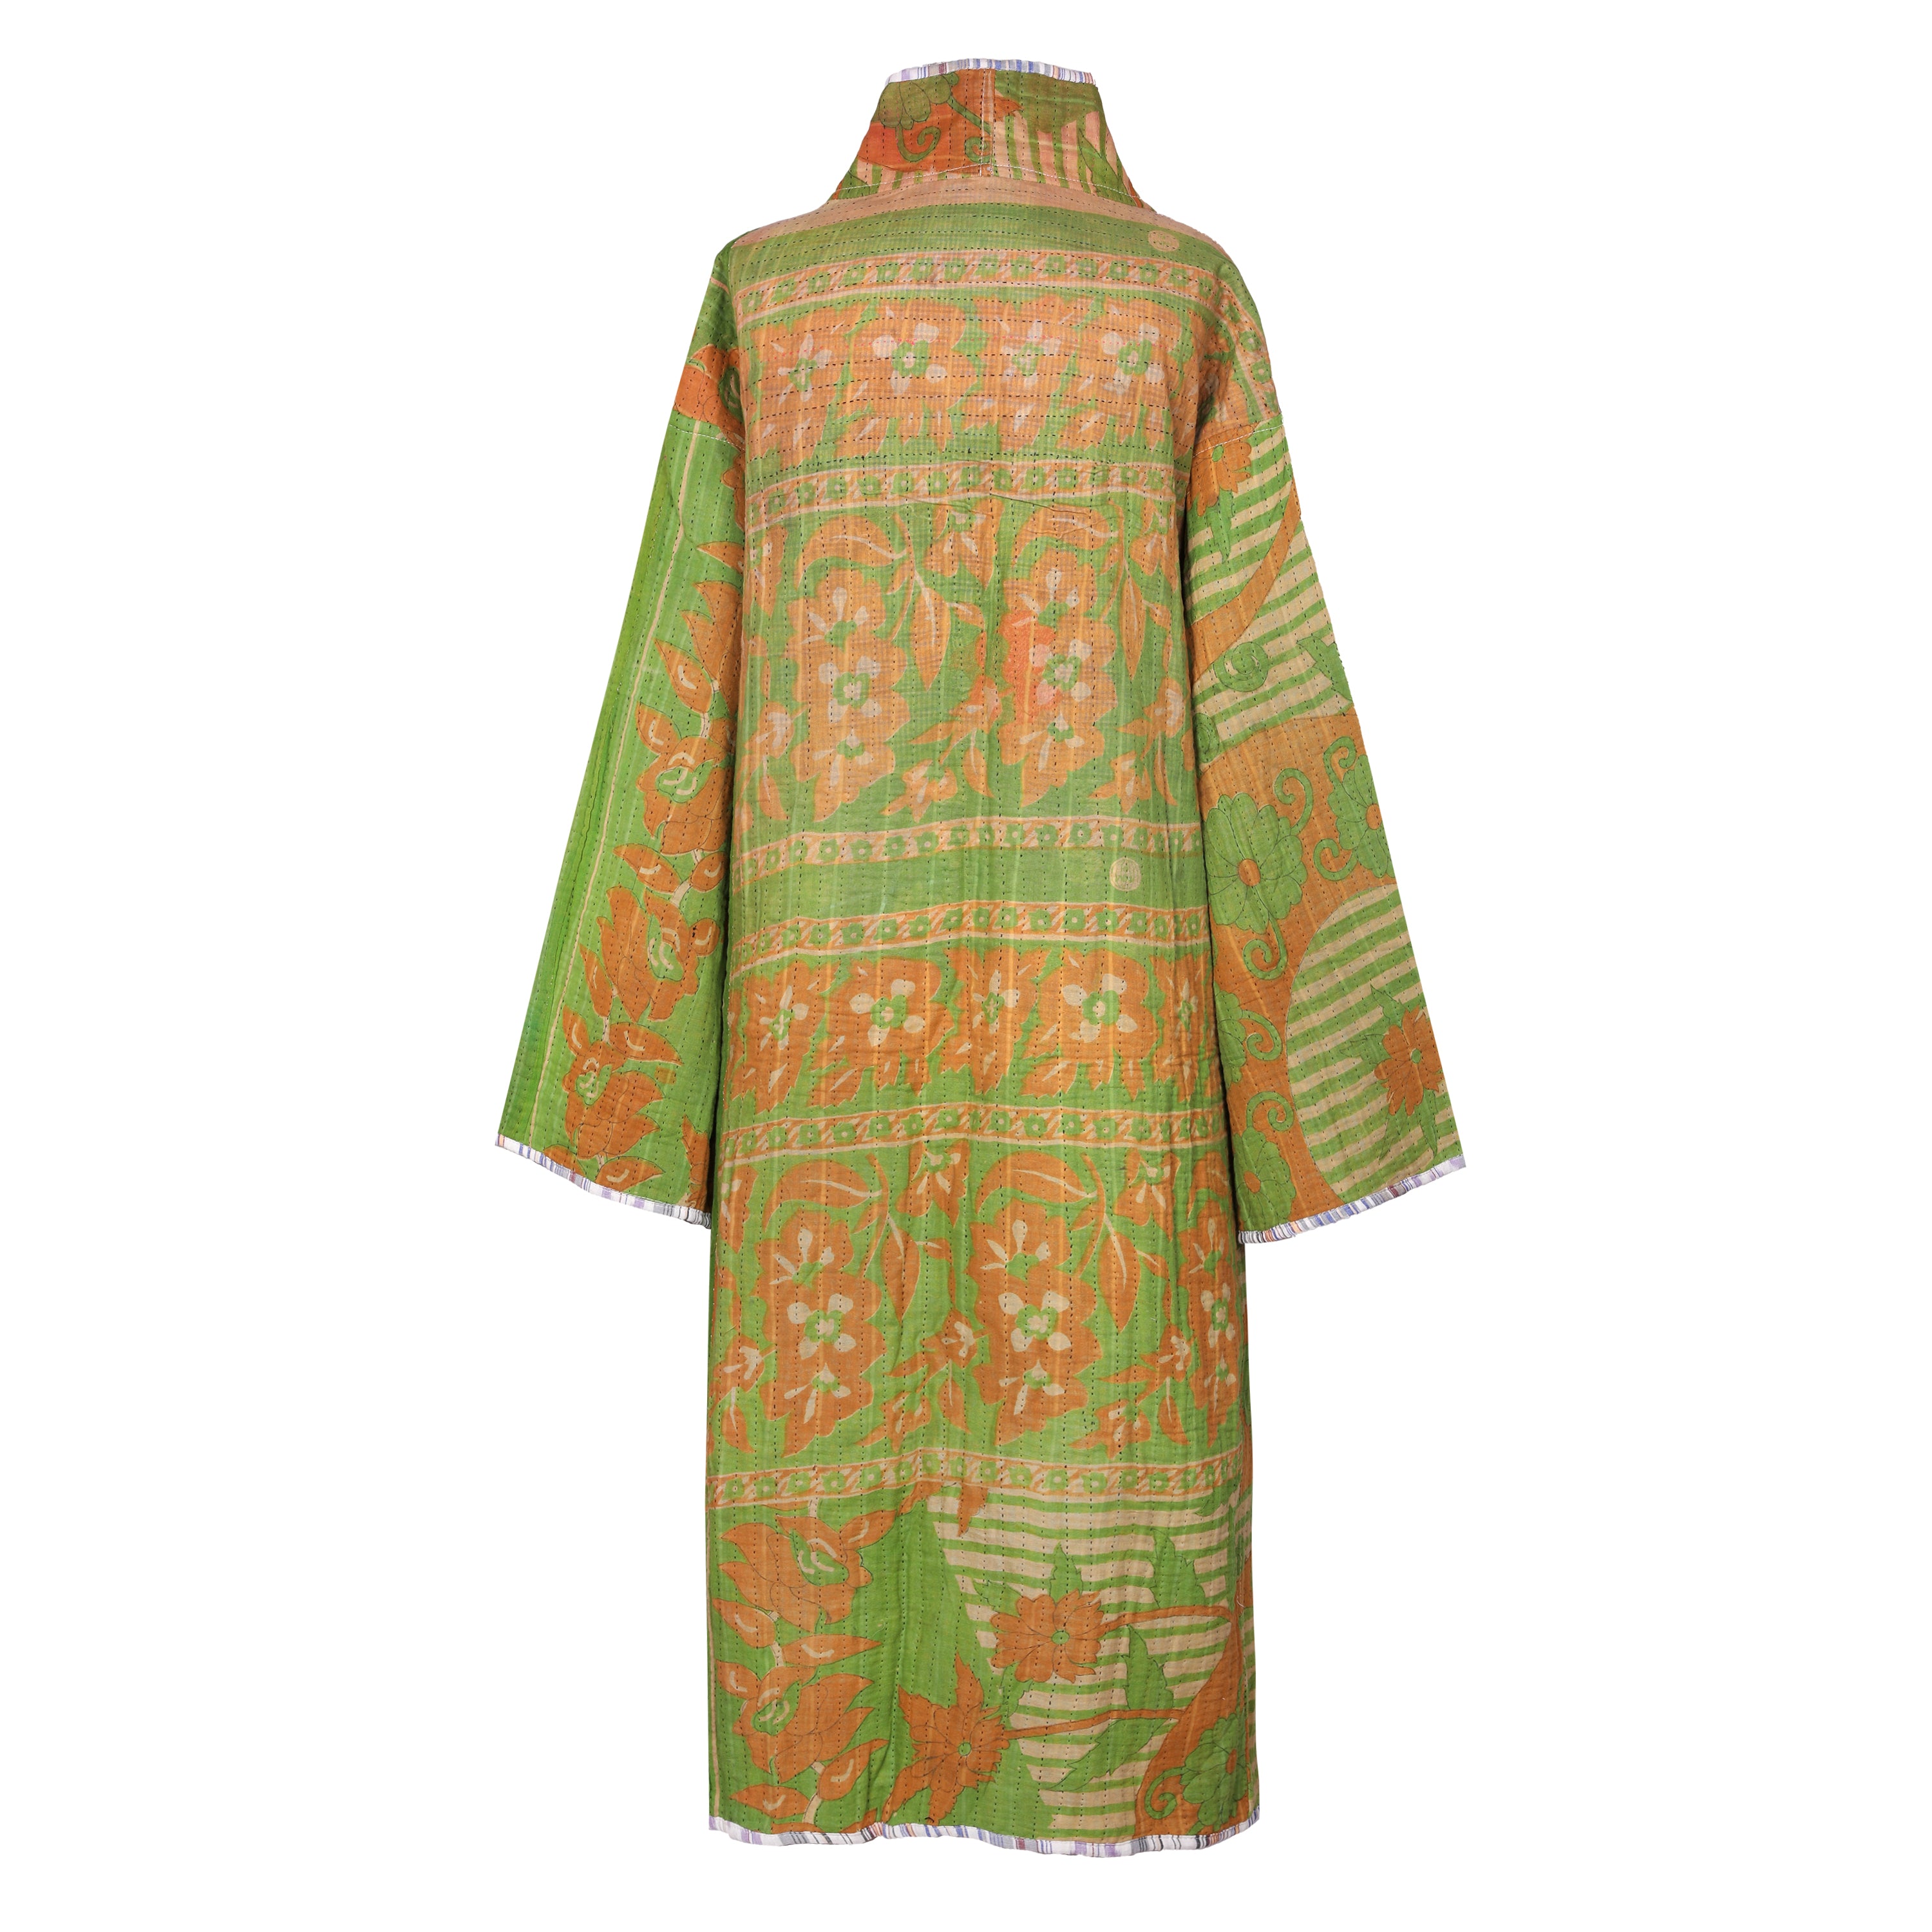 Lilavati Cotton Vintage Quilted Kantha Coat ONE OF KIND